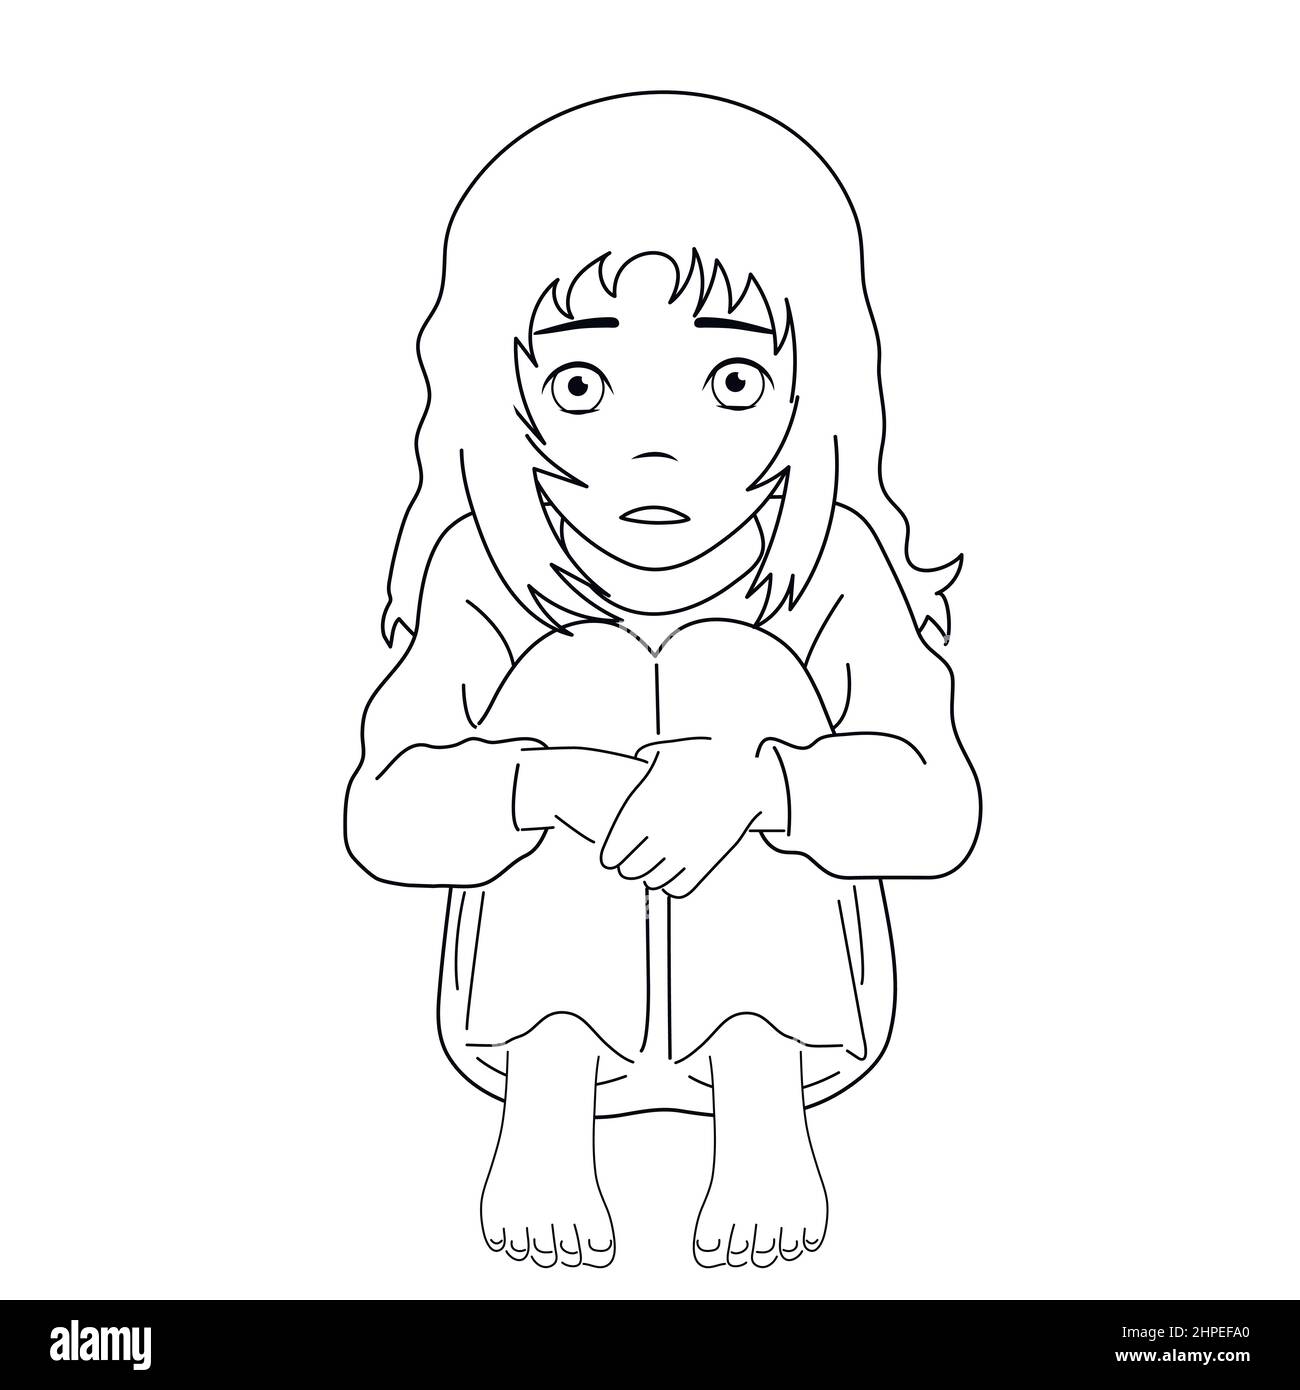 Black and white image. Frightened, depressed, sad girl looks lonely. Vector illustration of a helpless, frightened child. Anxiety and fear. White back Stock Vector